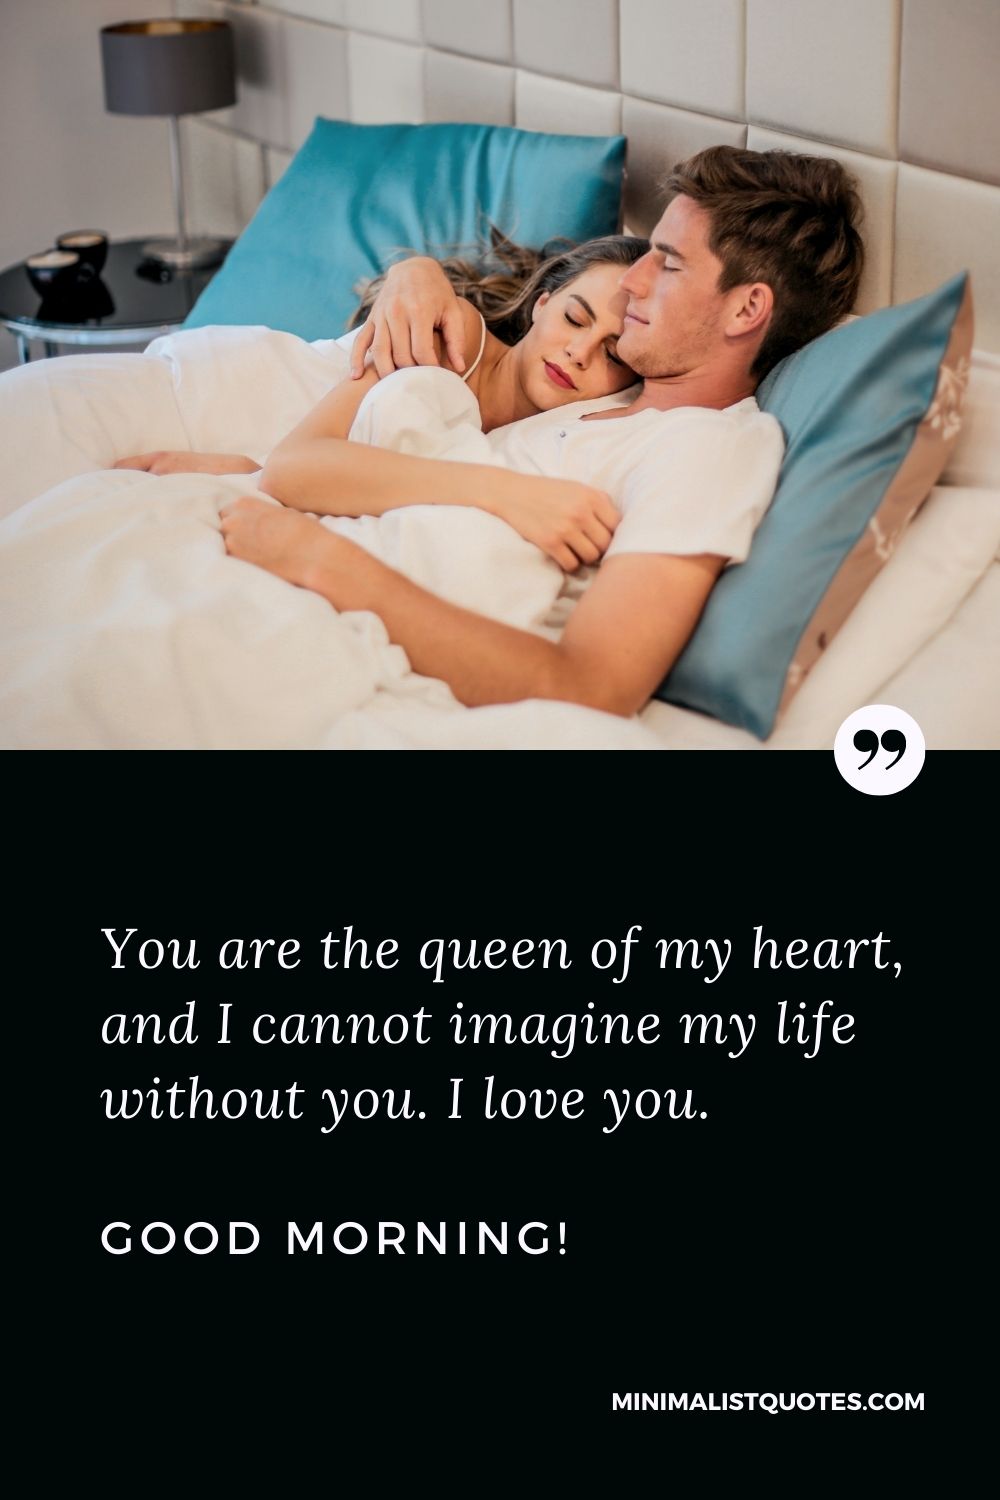 Good Morning Quote & Message For Wife: You are the queen of my heart, and I cannot imagine my life without you. I love you. Good Morning!